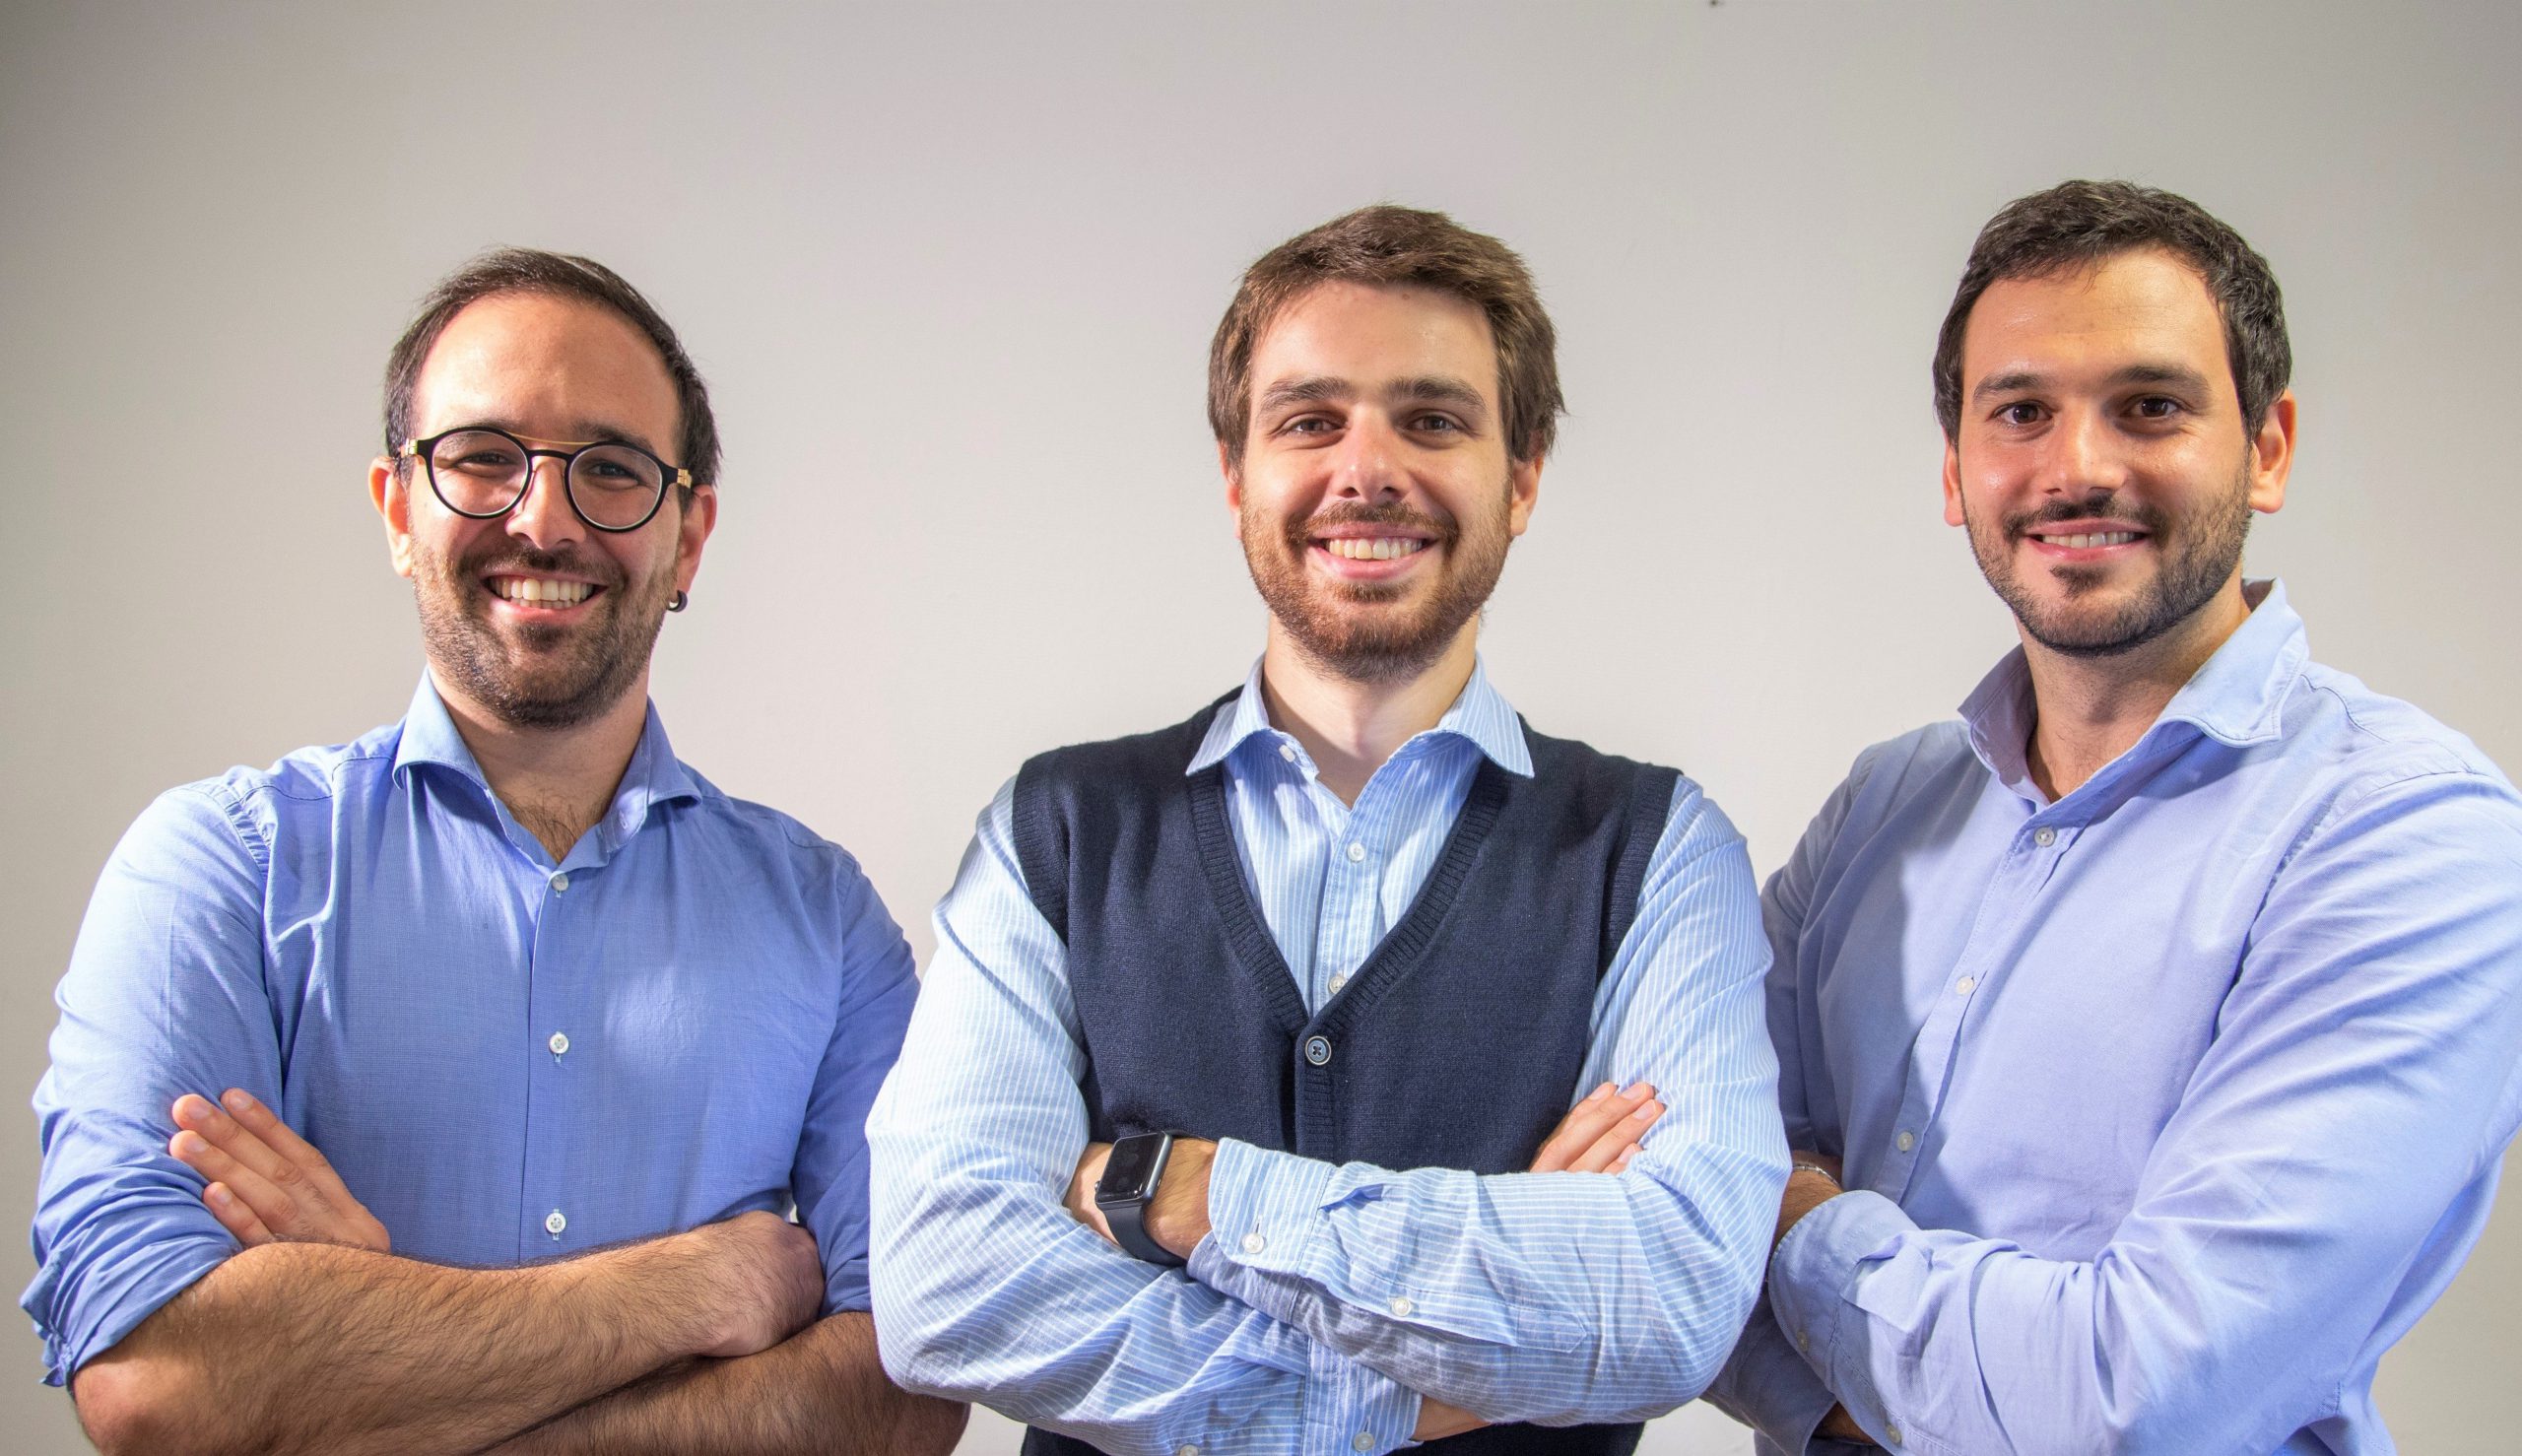 The Italian startup Teiacare raises 1,1 mln € with the help of the EIT Health